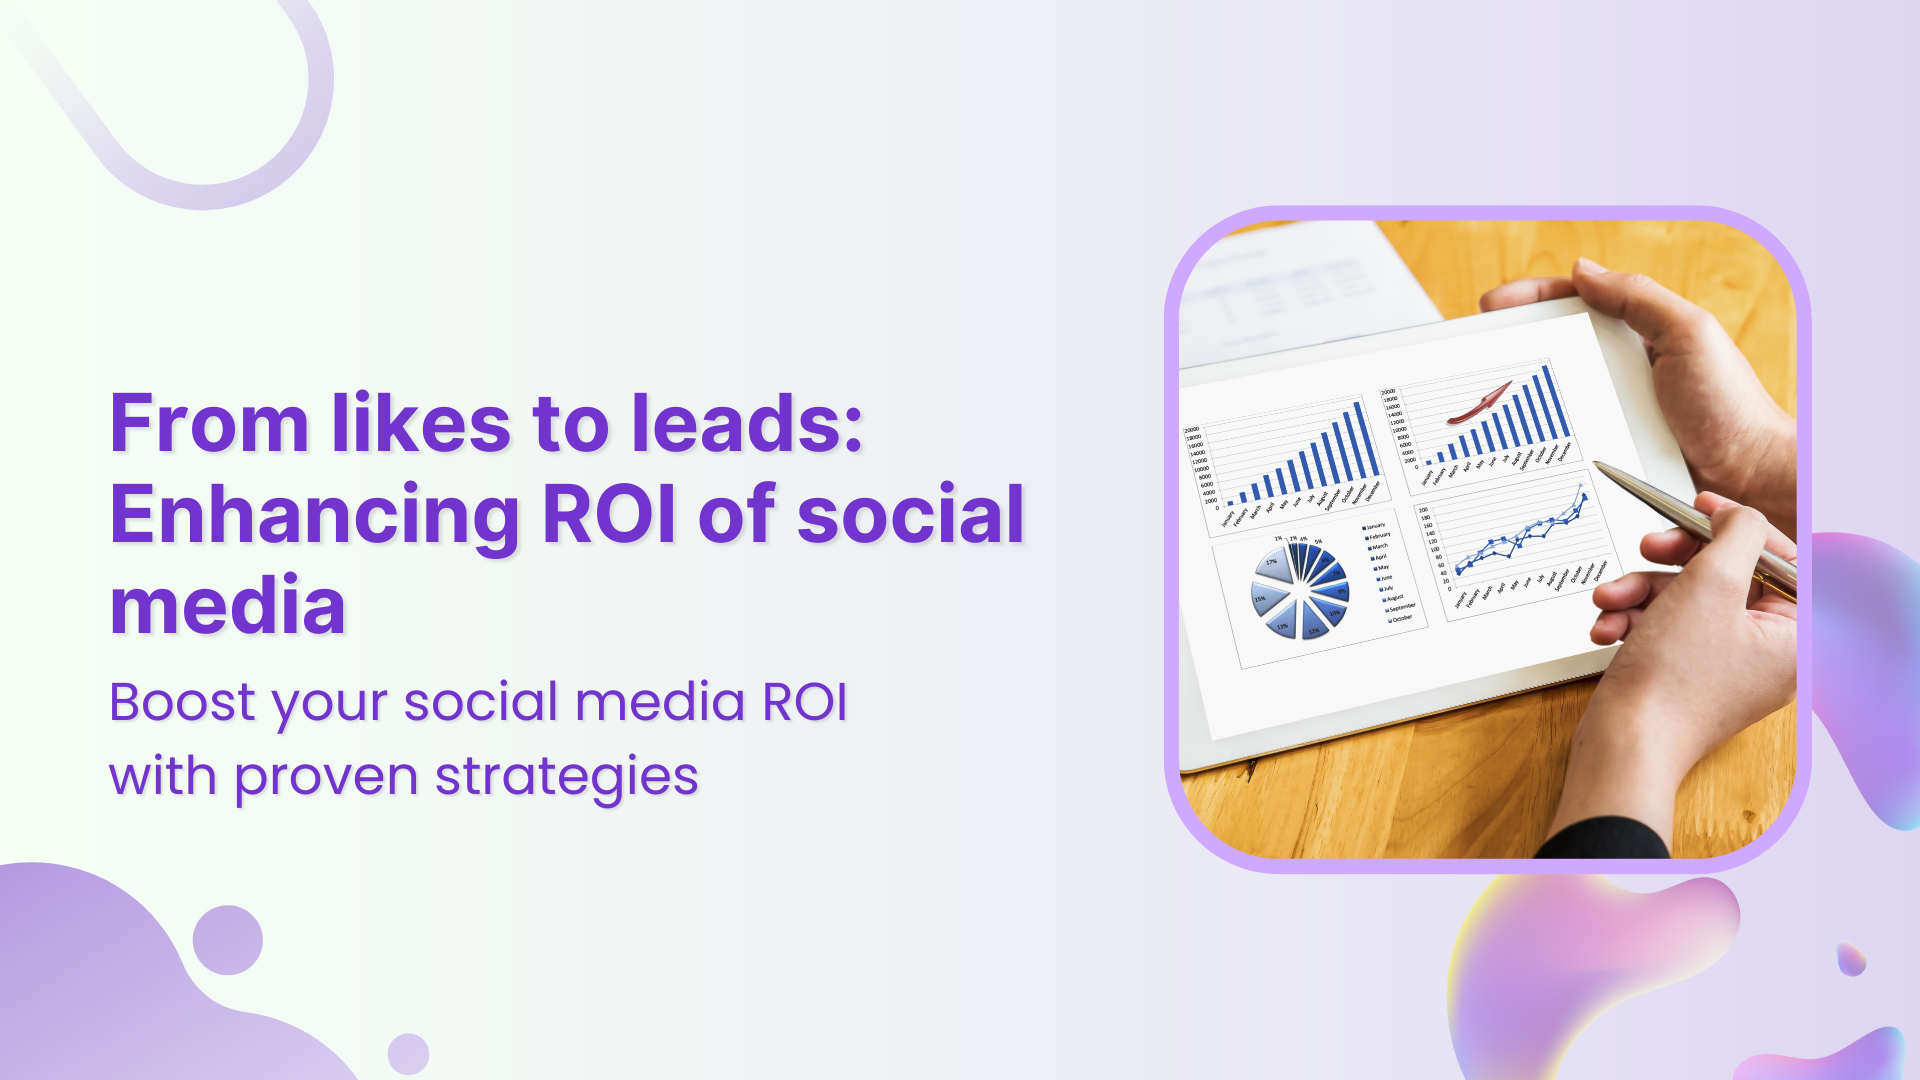 From likes to leads: Enhancing ROI of social media